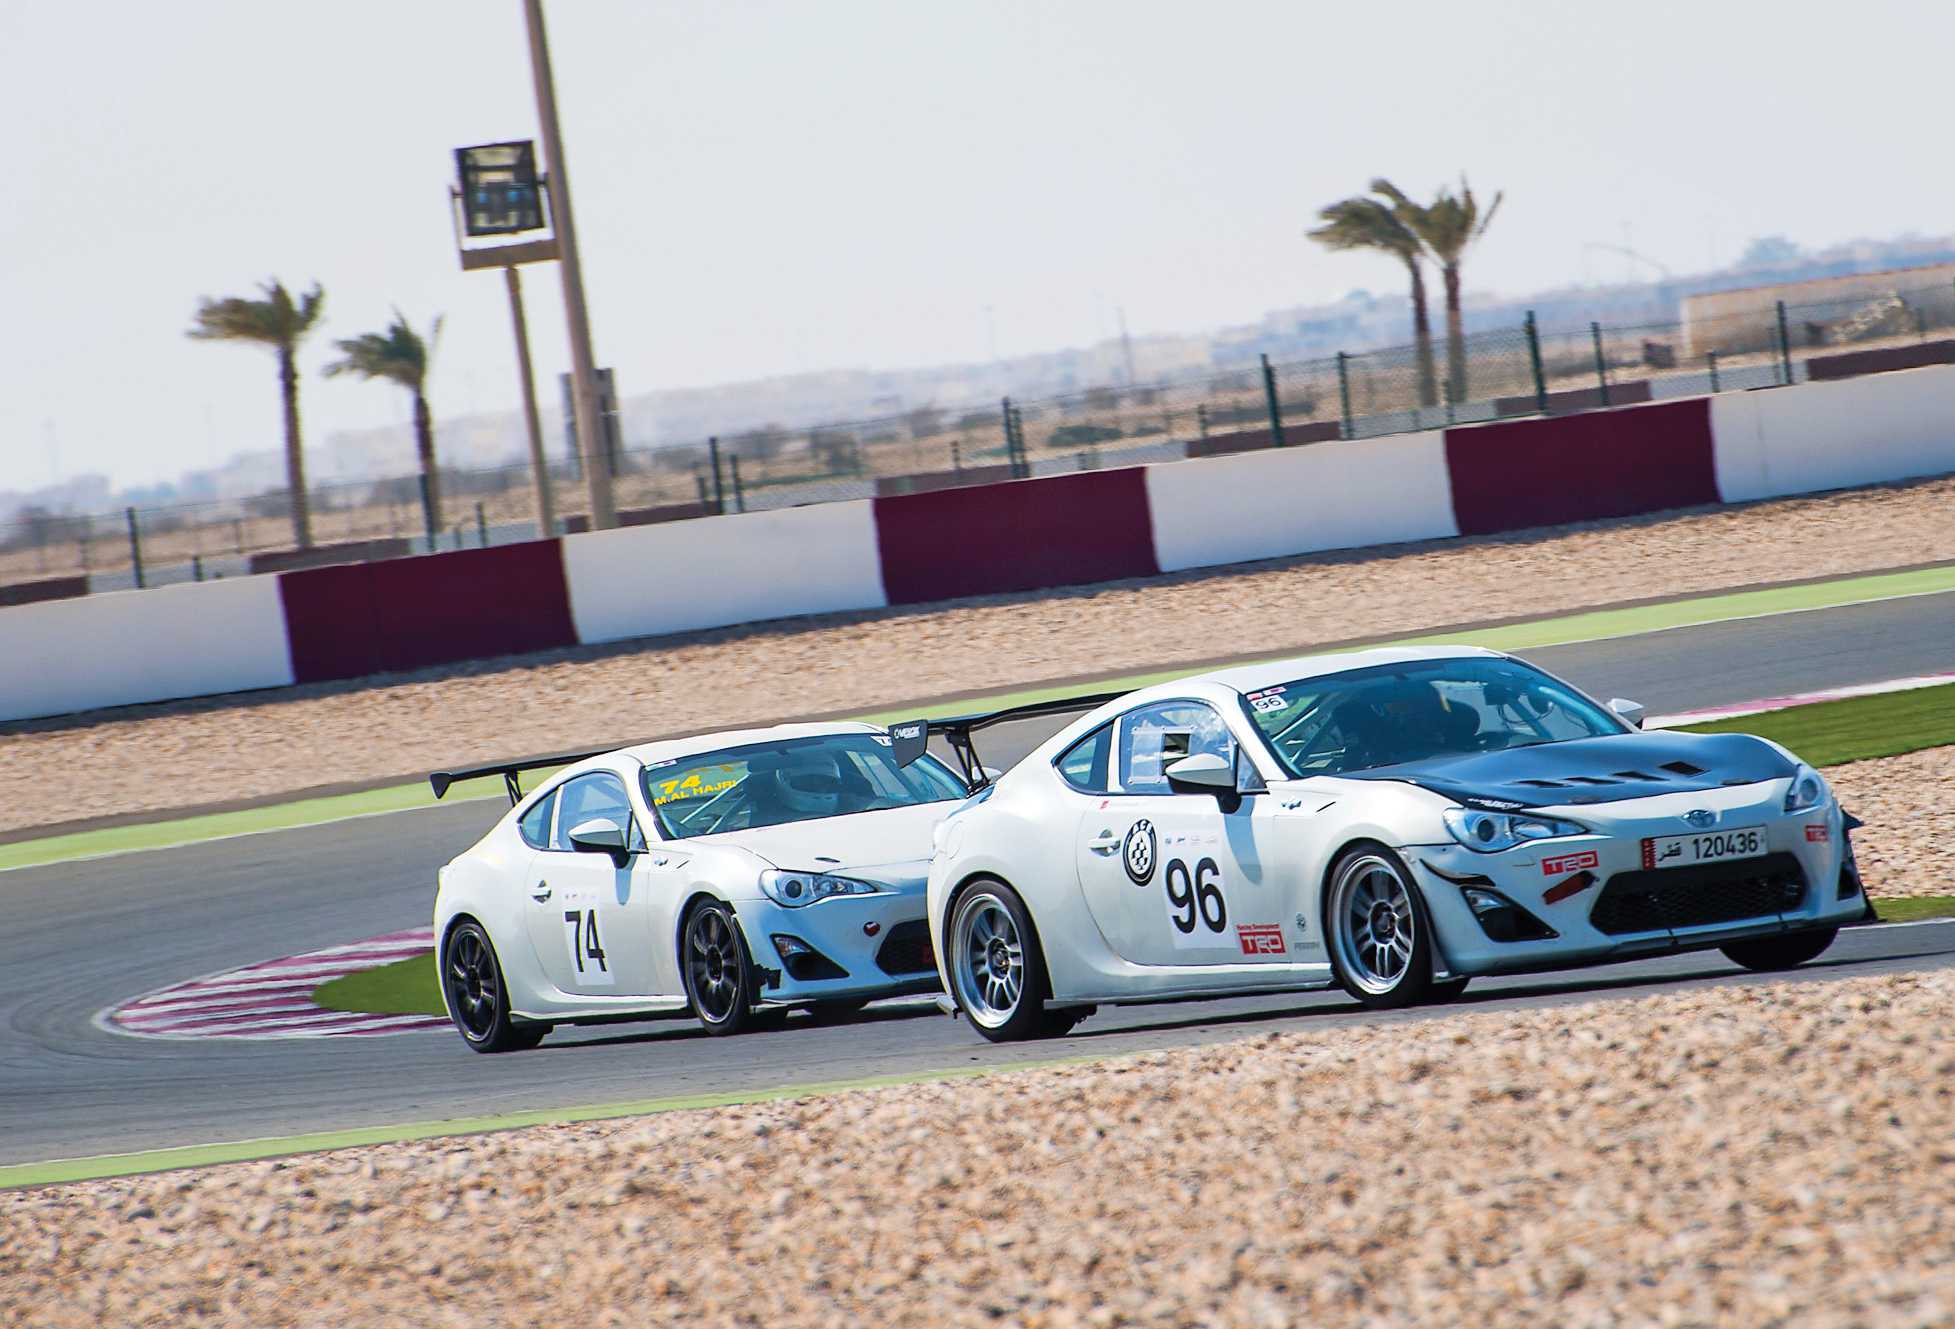 Al Khelaifi takes the two victories on	the second round of QTCC